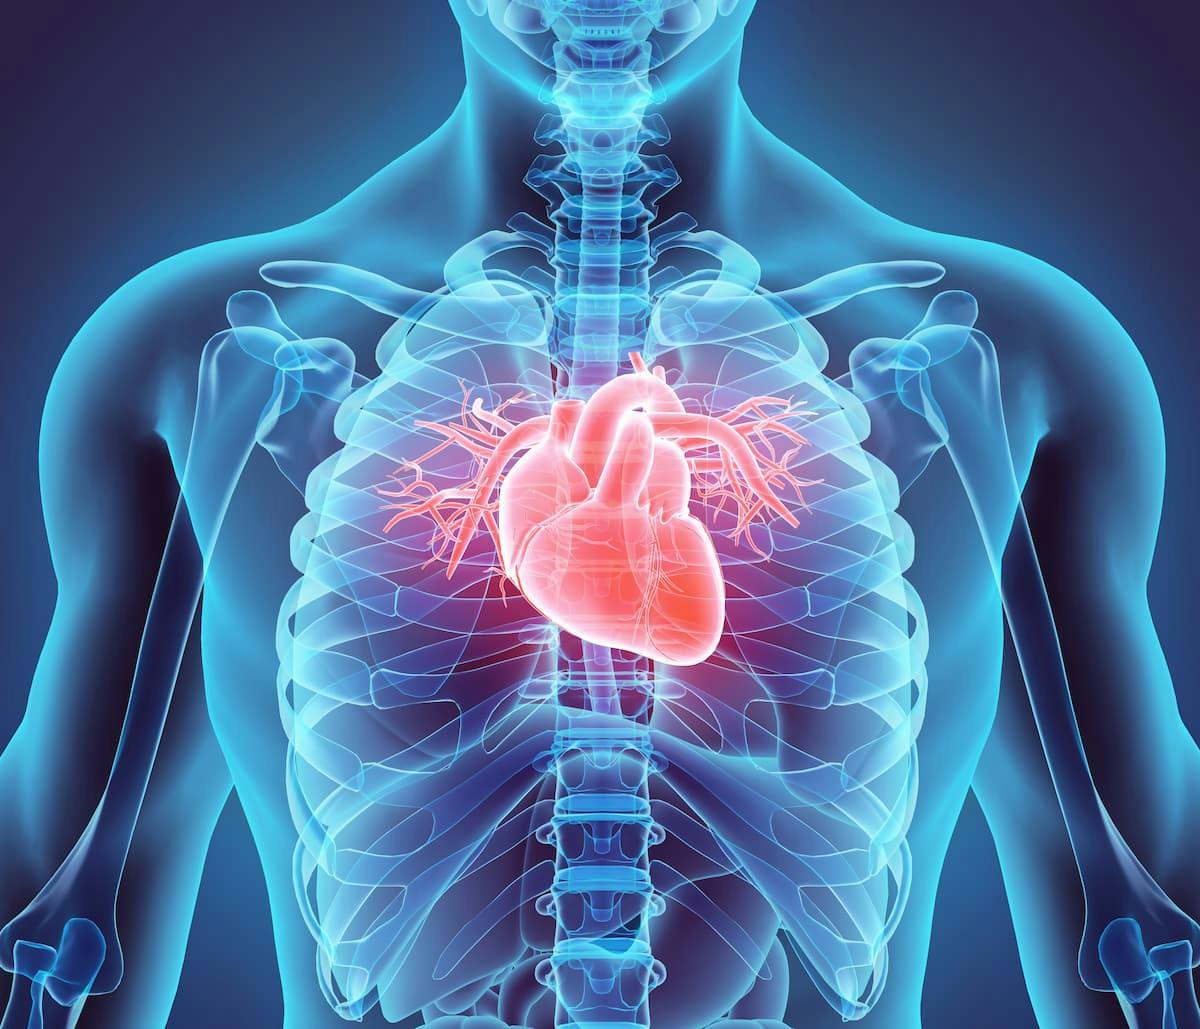 Tenaya’s Trial of Hypertrophic Cardiomyopathy Gene Therapy TN-201 Doses First Patient 